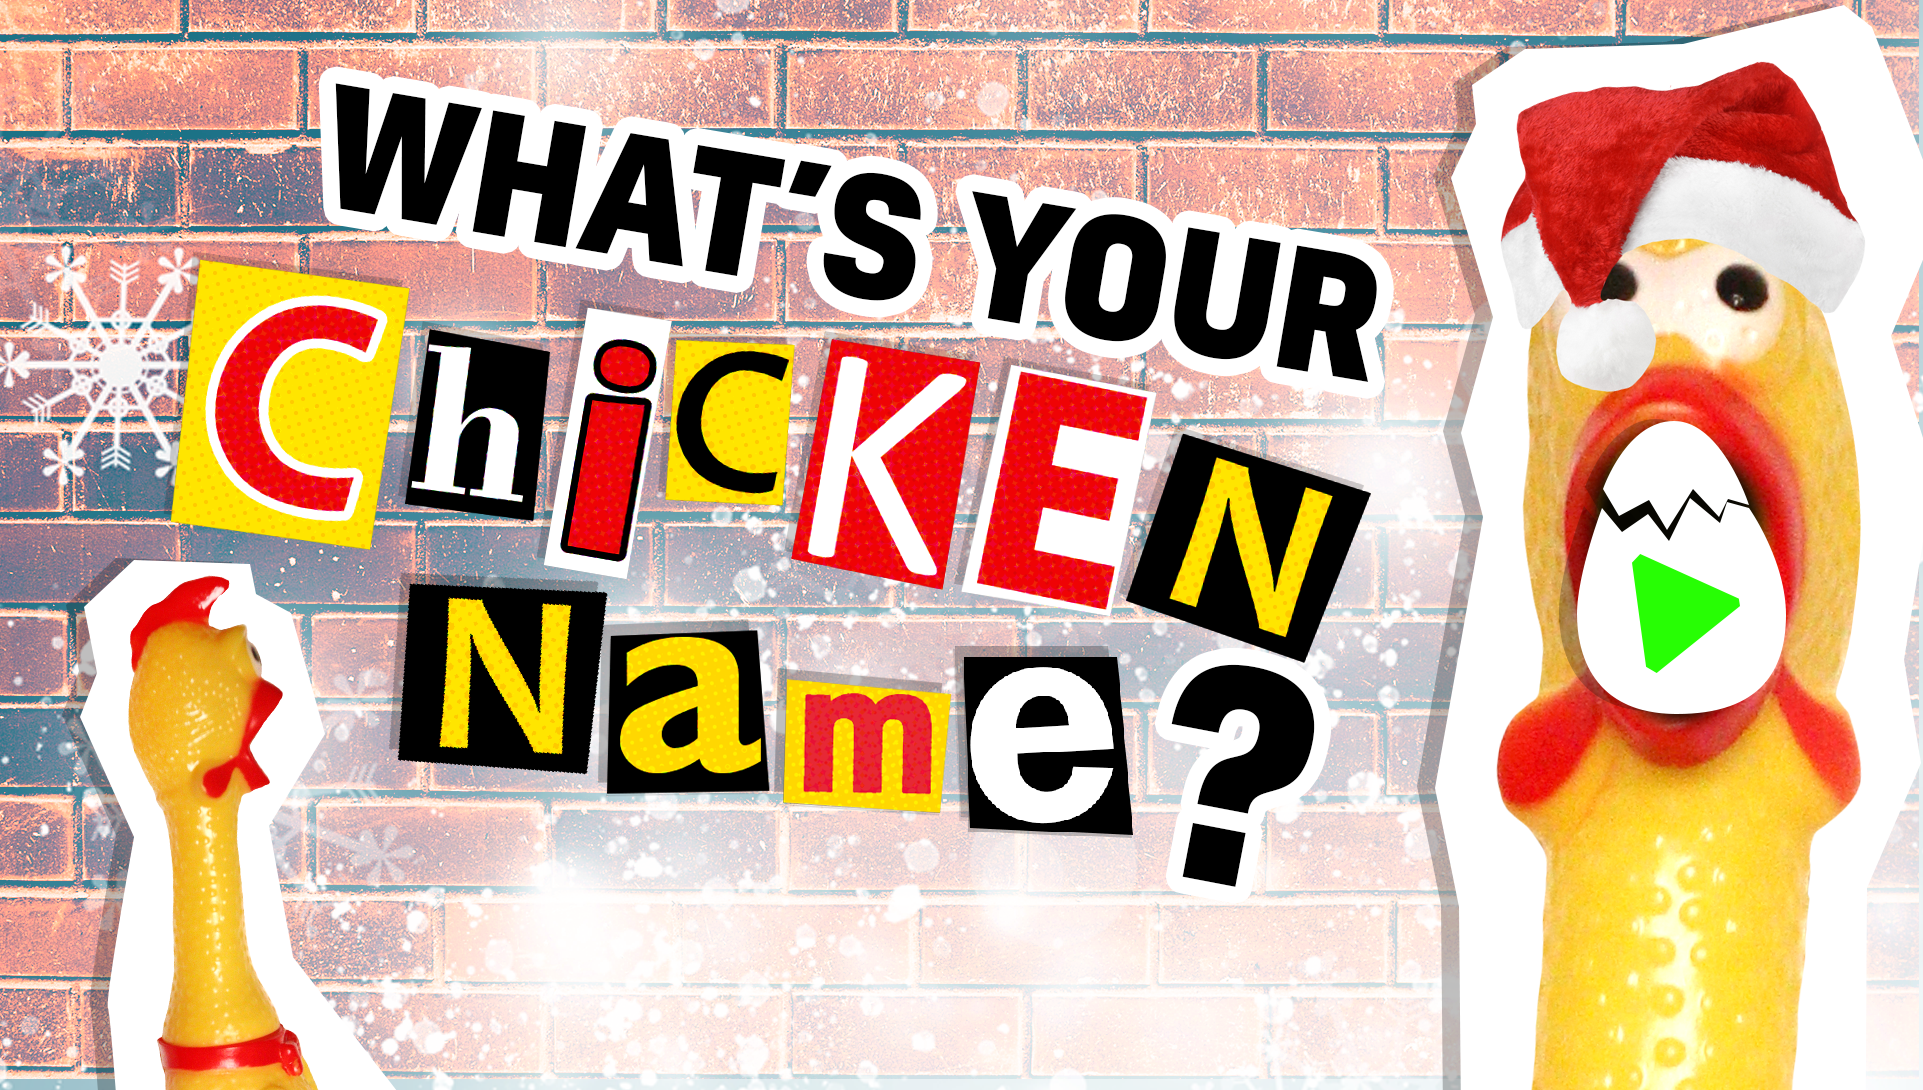 What's Your Rubber Chicken Name?